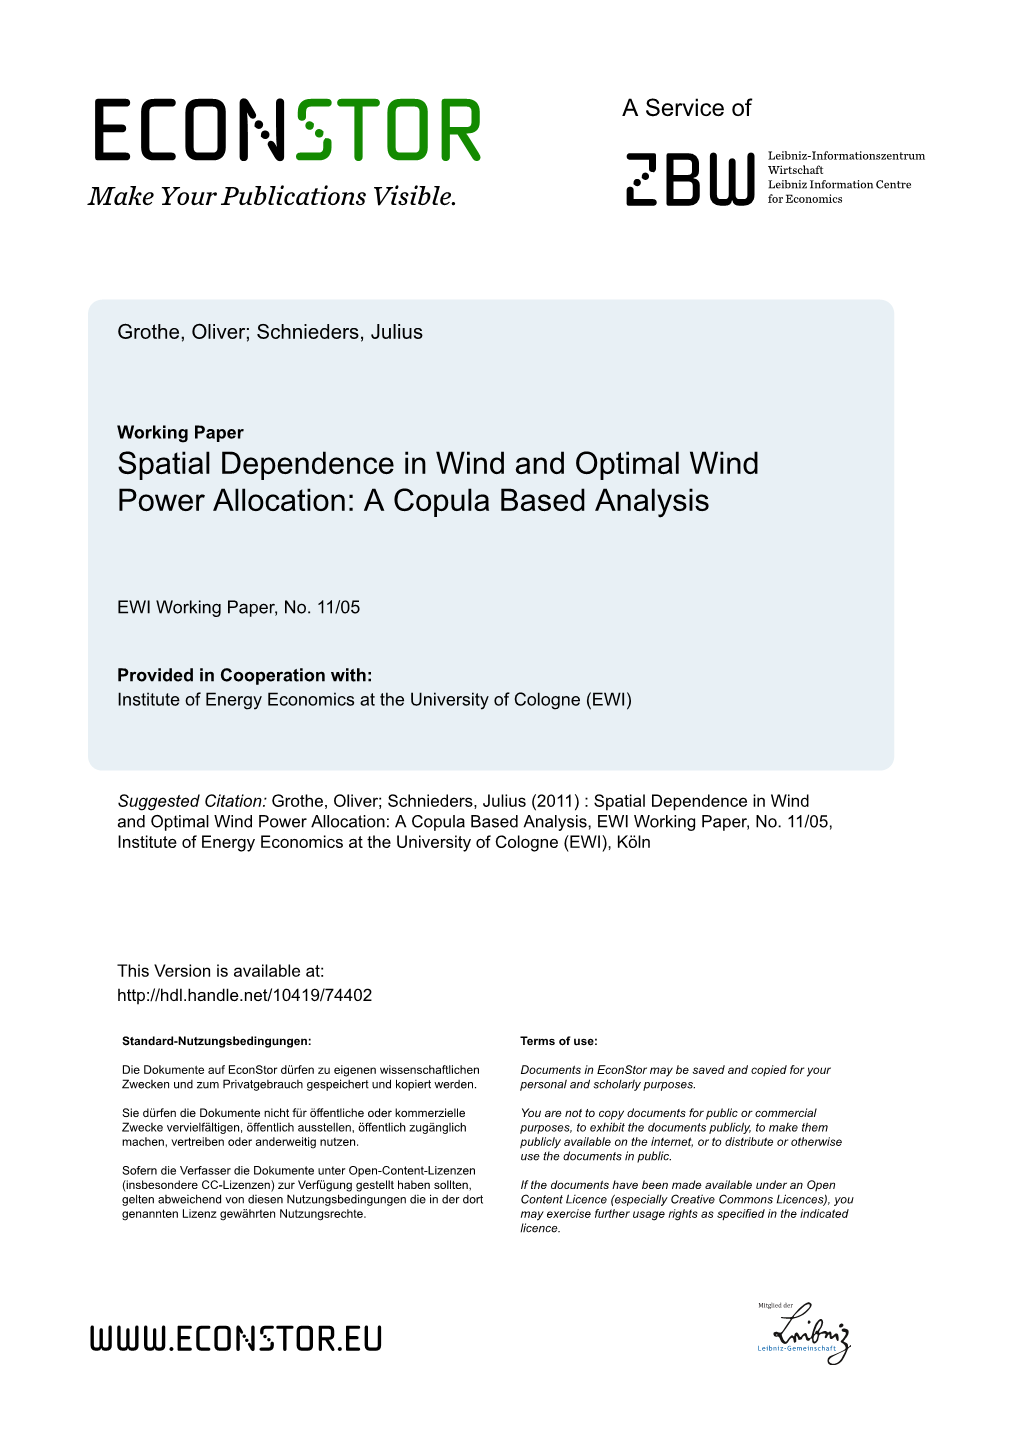 Spatial Dependence in Wind and Optimal Wind Power Allocation: a Copula Based Analysis